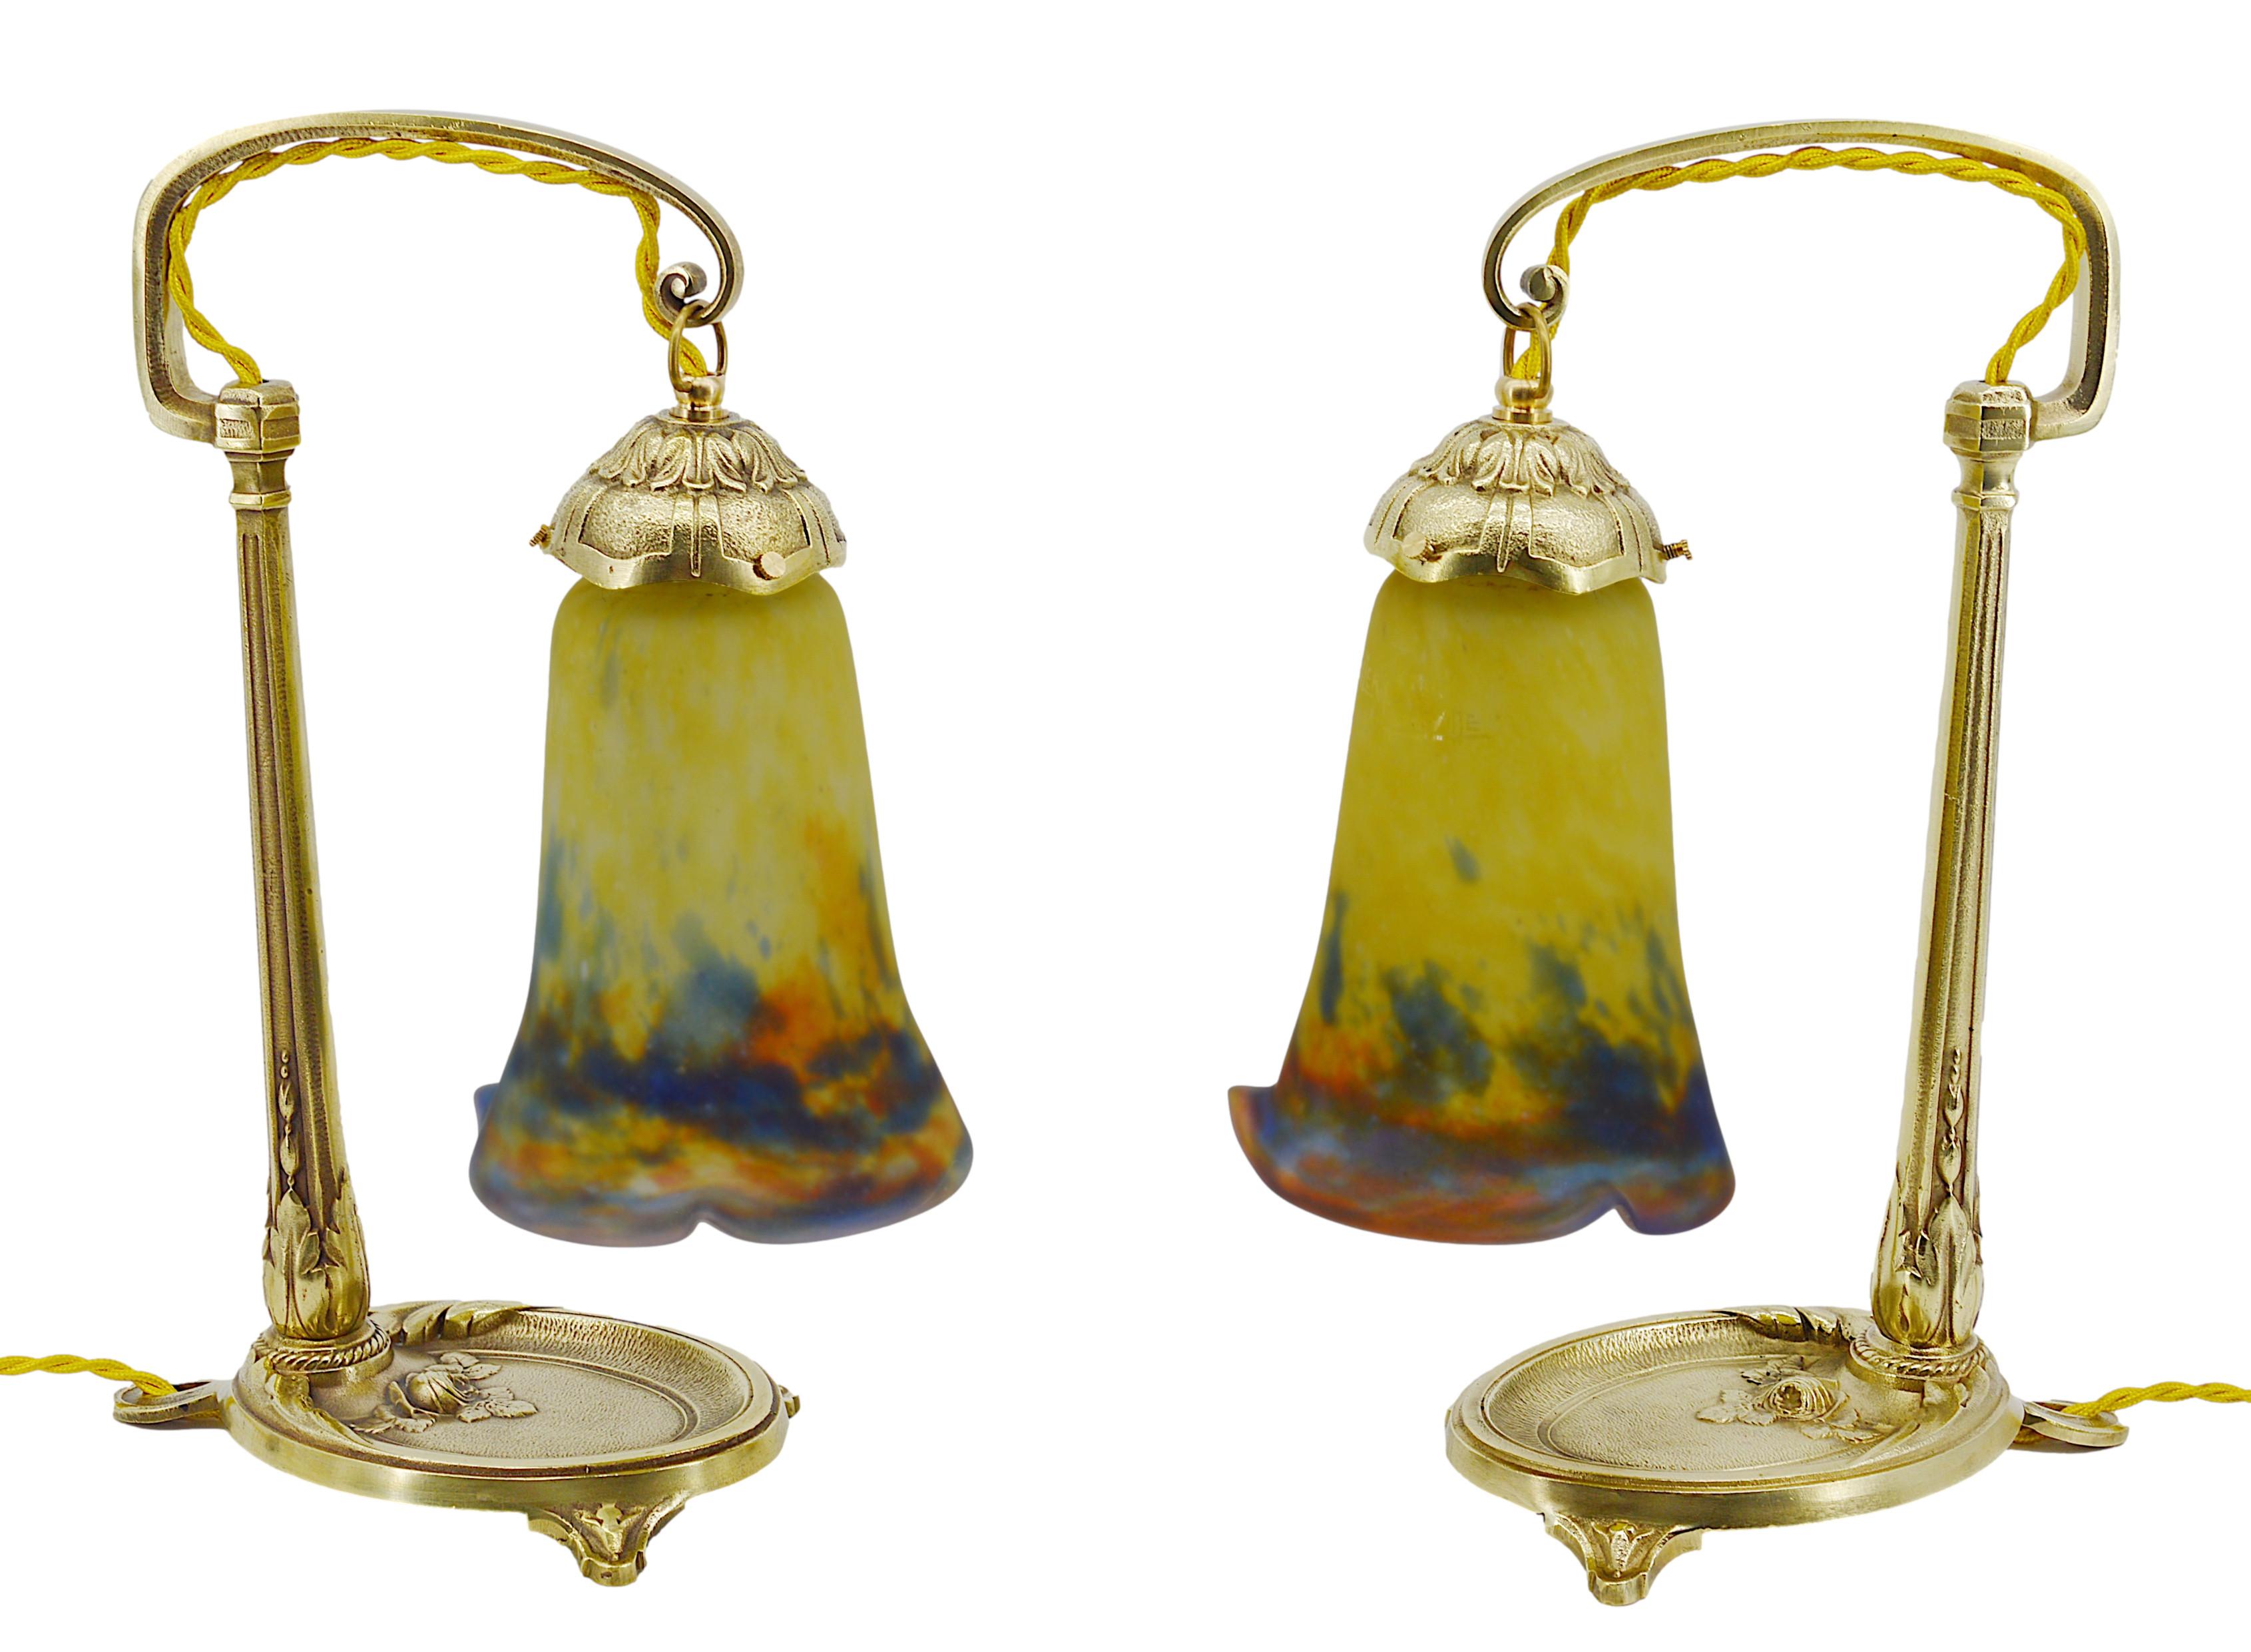 Pair of French Art Deco table lamps by Muller Freres (Luneville) and Charles RANC (Paris), France, ca.1920. Mottled glass shades by Muller Freres, stretched with the tool, powders are applied between two layers, that come on their beautiful bronze